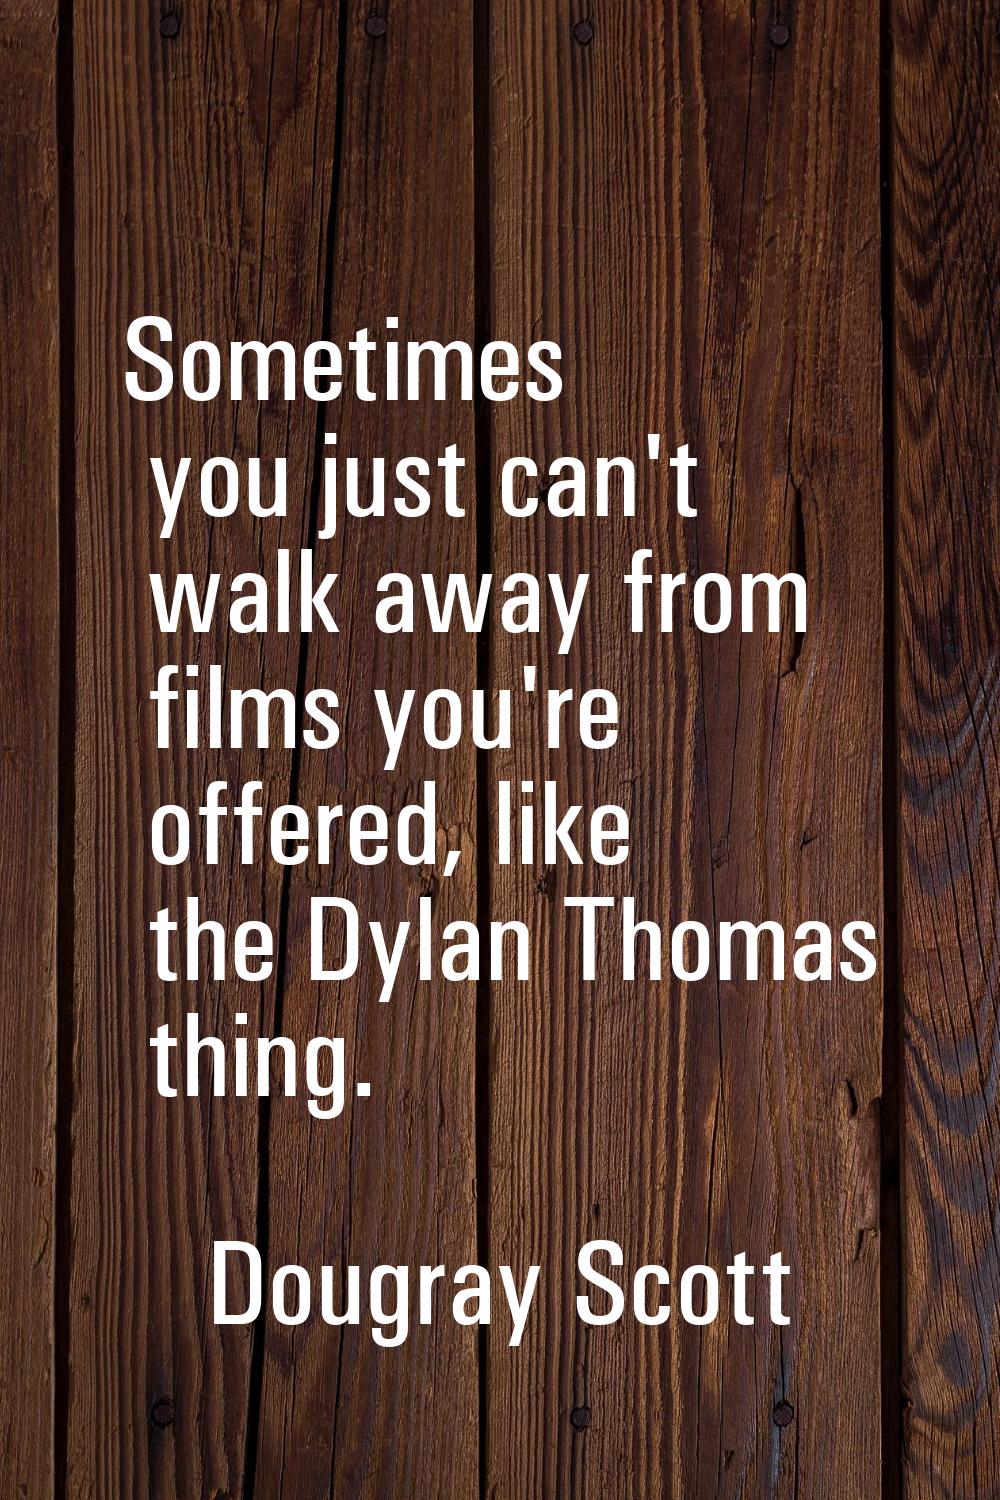 Sometimes you just can't walk away from films you're offered, like the Dylan Thomas thing.